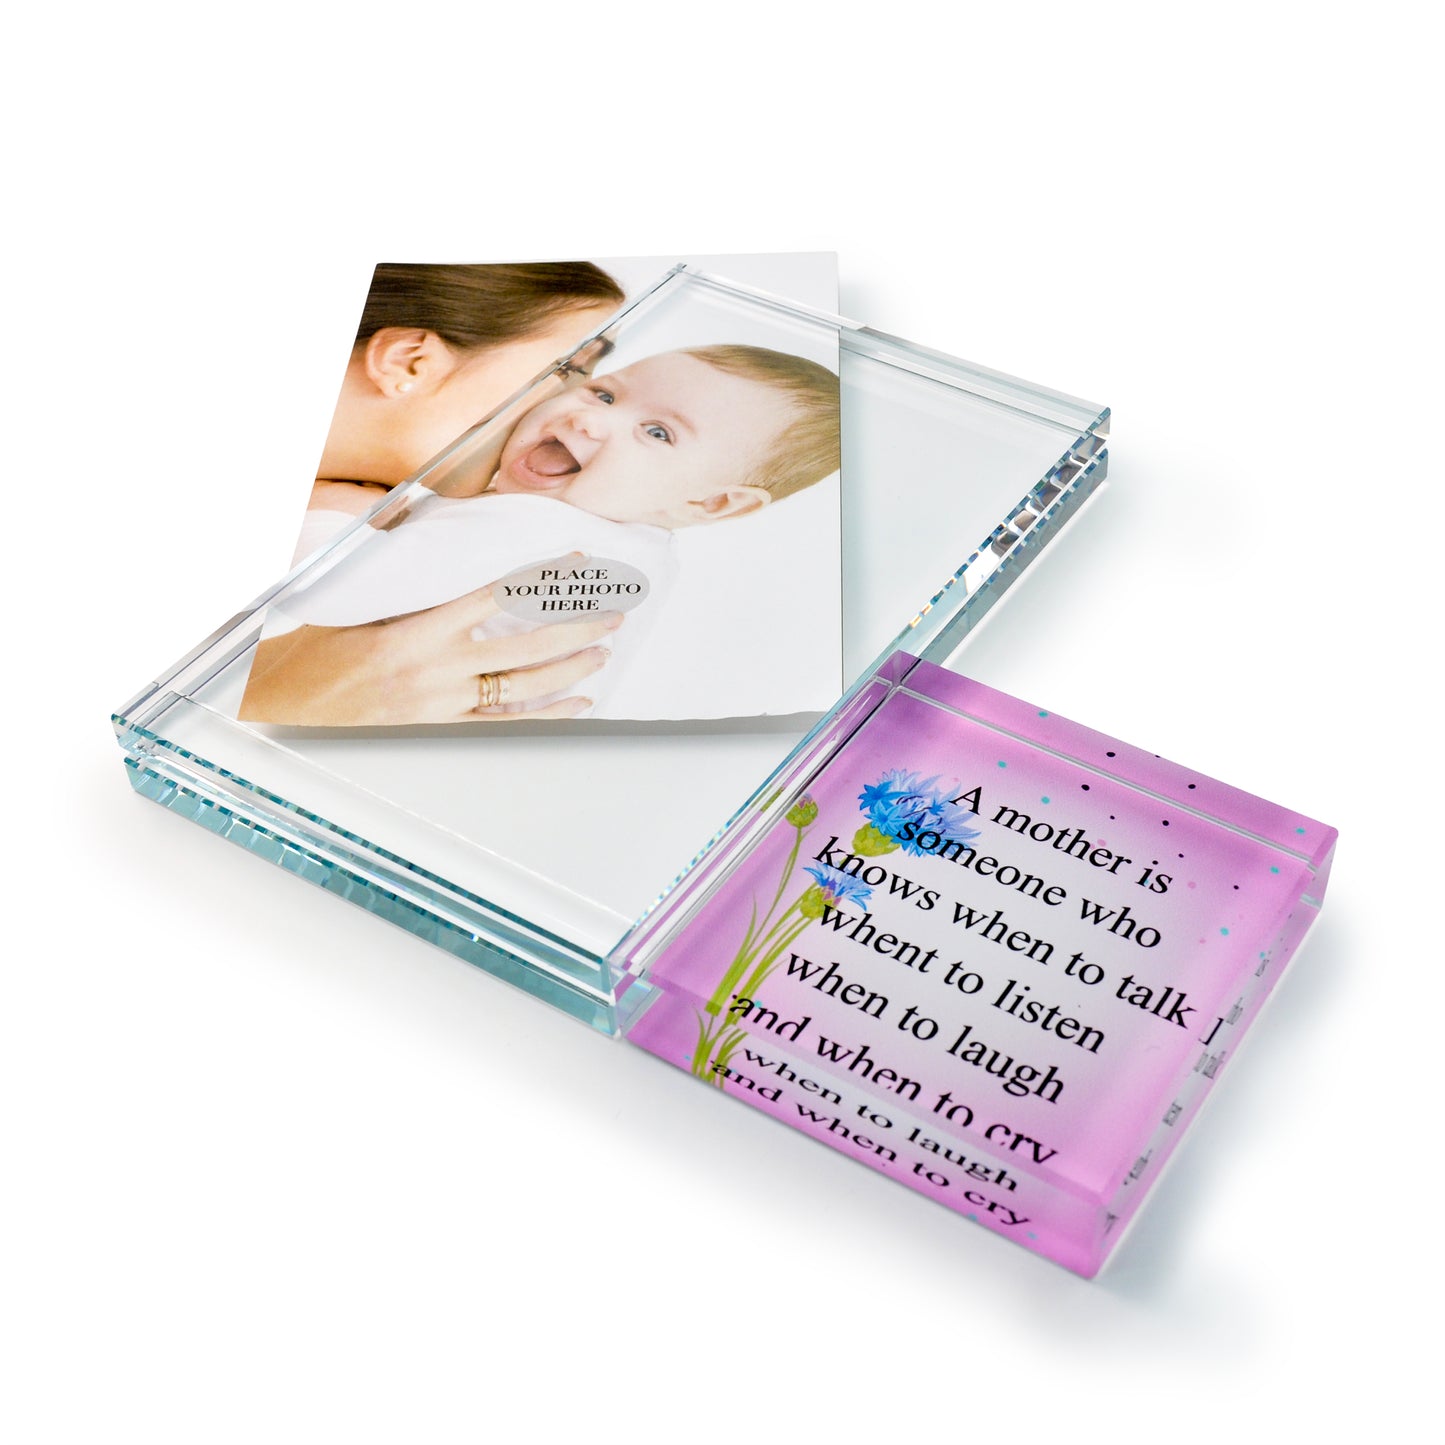 Mother's Day Glass Photo Frame "A Mother Is" By Crystal Castle